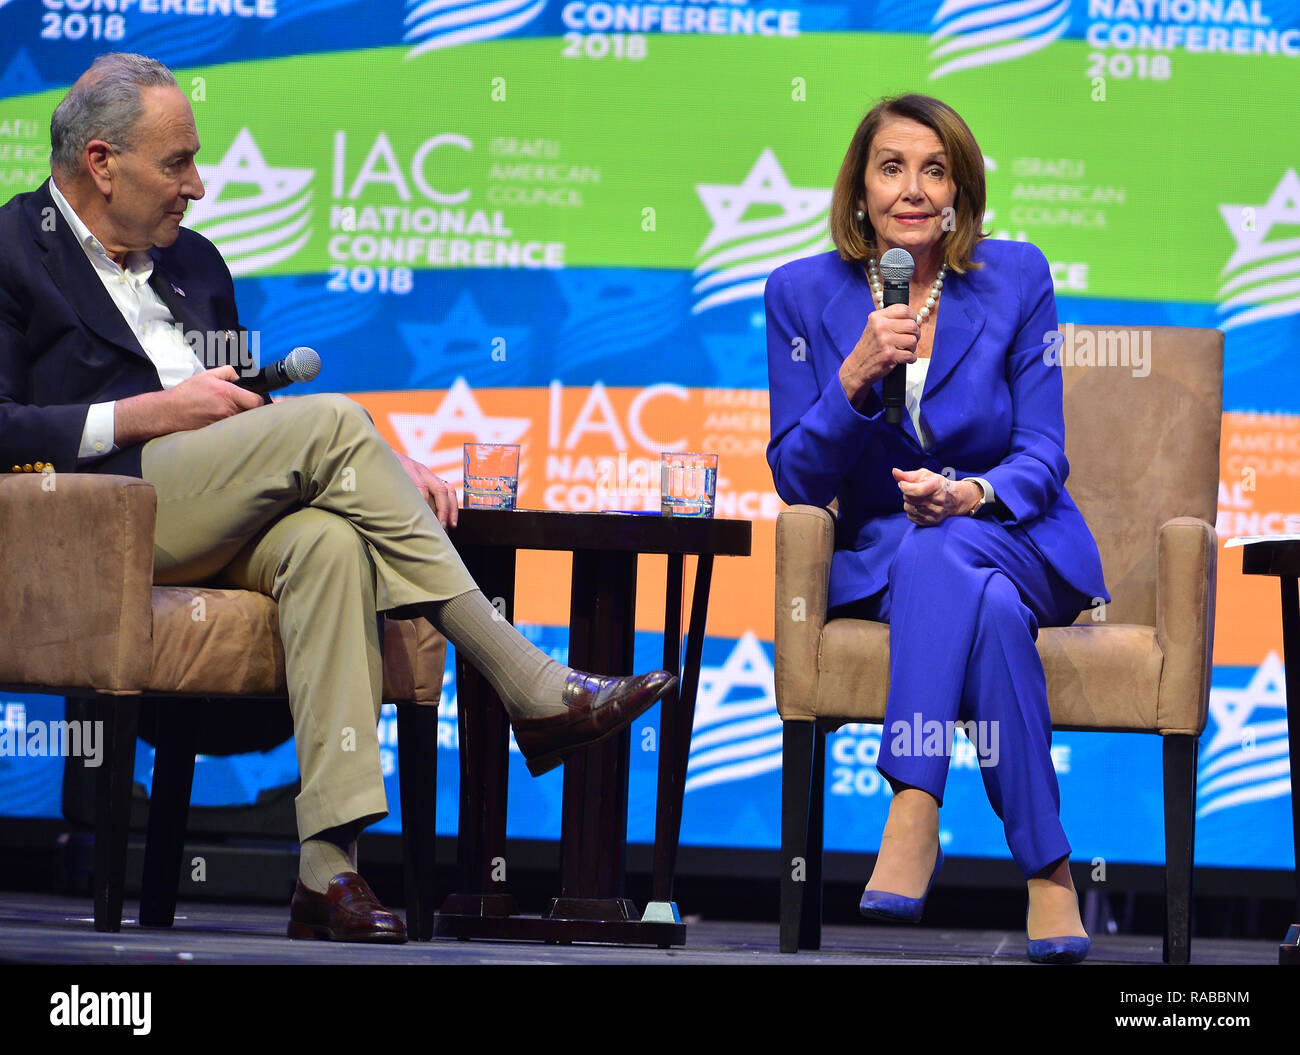 The 5th Israeli-American Council National Conference 2018 at the Diplomat Resort Hollywood on December 02, 2018 in Hollywood, Florida.  Featuring: Senate Democratic Leader Chuck Schumer (D-NY), House Democratic Leader Nancy Pelosi (D-CA) Where: Hollywood, Florida, United States When: 02 Dec 2018 Credit: Johnny Louis/WENN.com Stock Photo